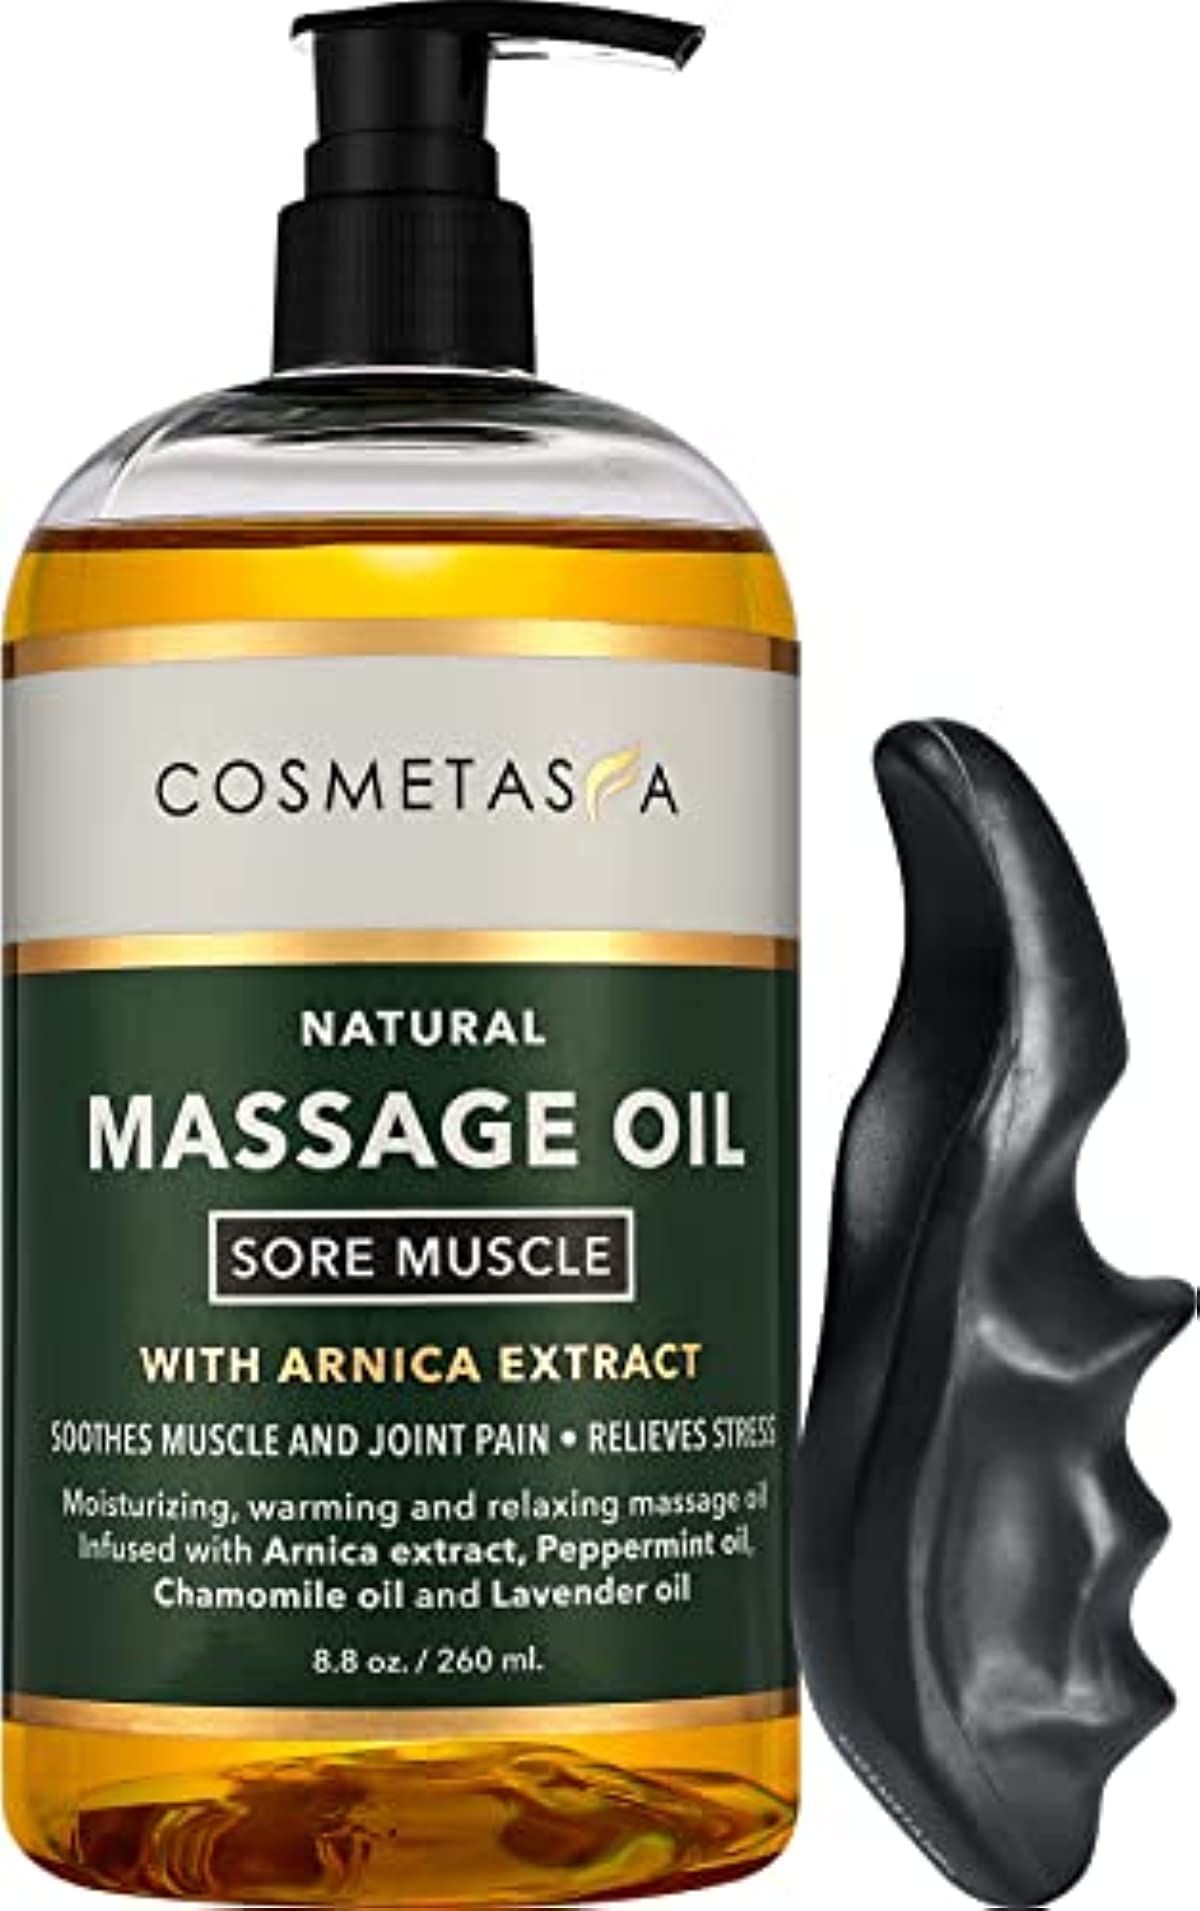 Cosmetasa Sore Muscle Massage Oil with Deep Tissue Massager - Thumb Saver and Oil Soothes Muscle and Joint Pain with Arnica Extract, Peppermint, Chamomile, and Lavender Oil 8.8 Fl Oz